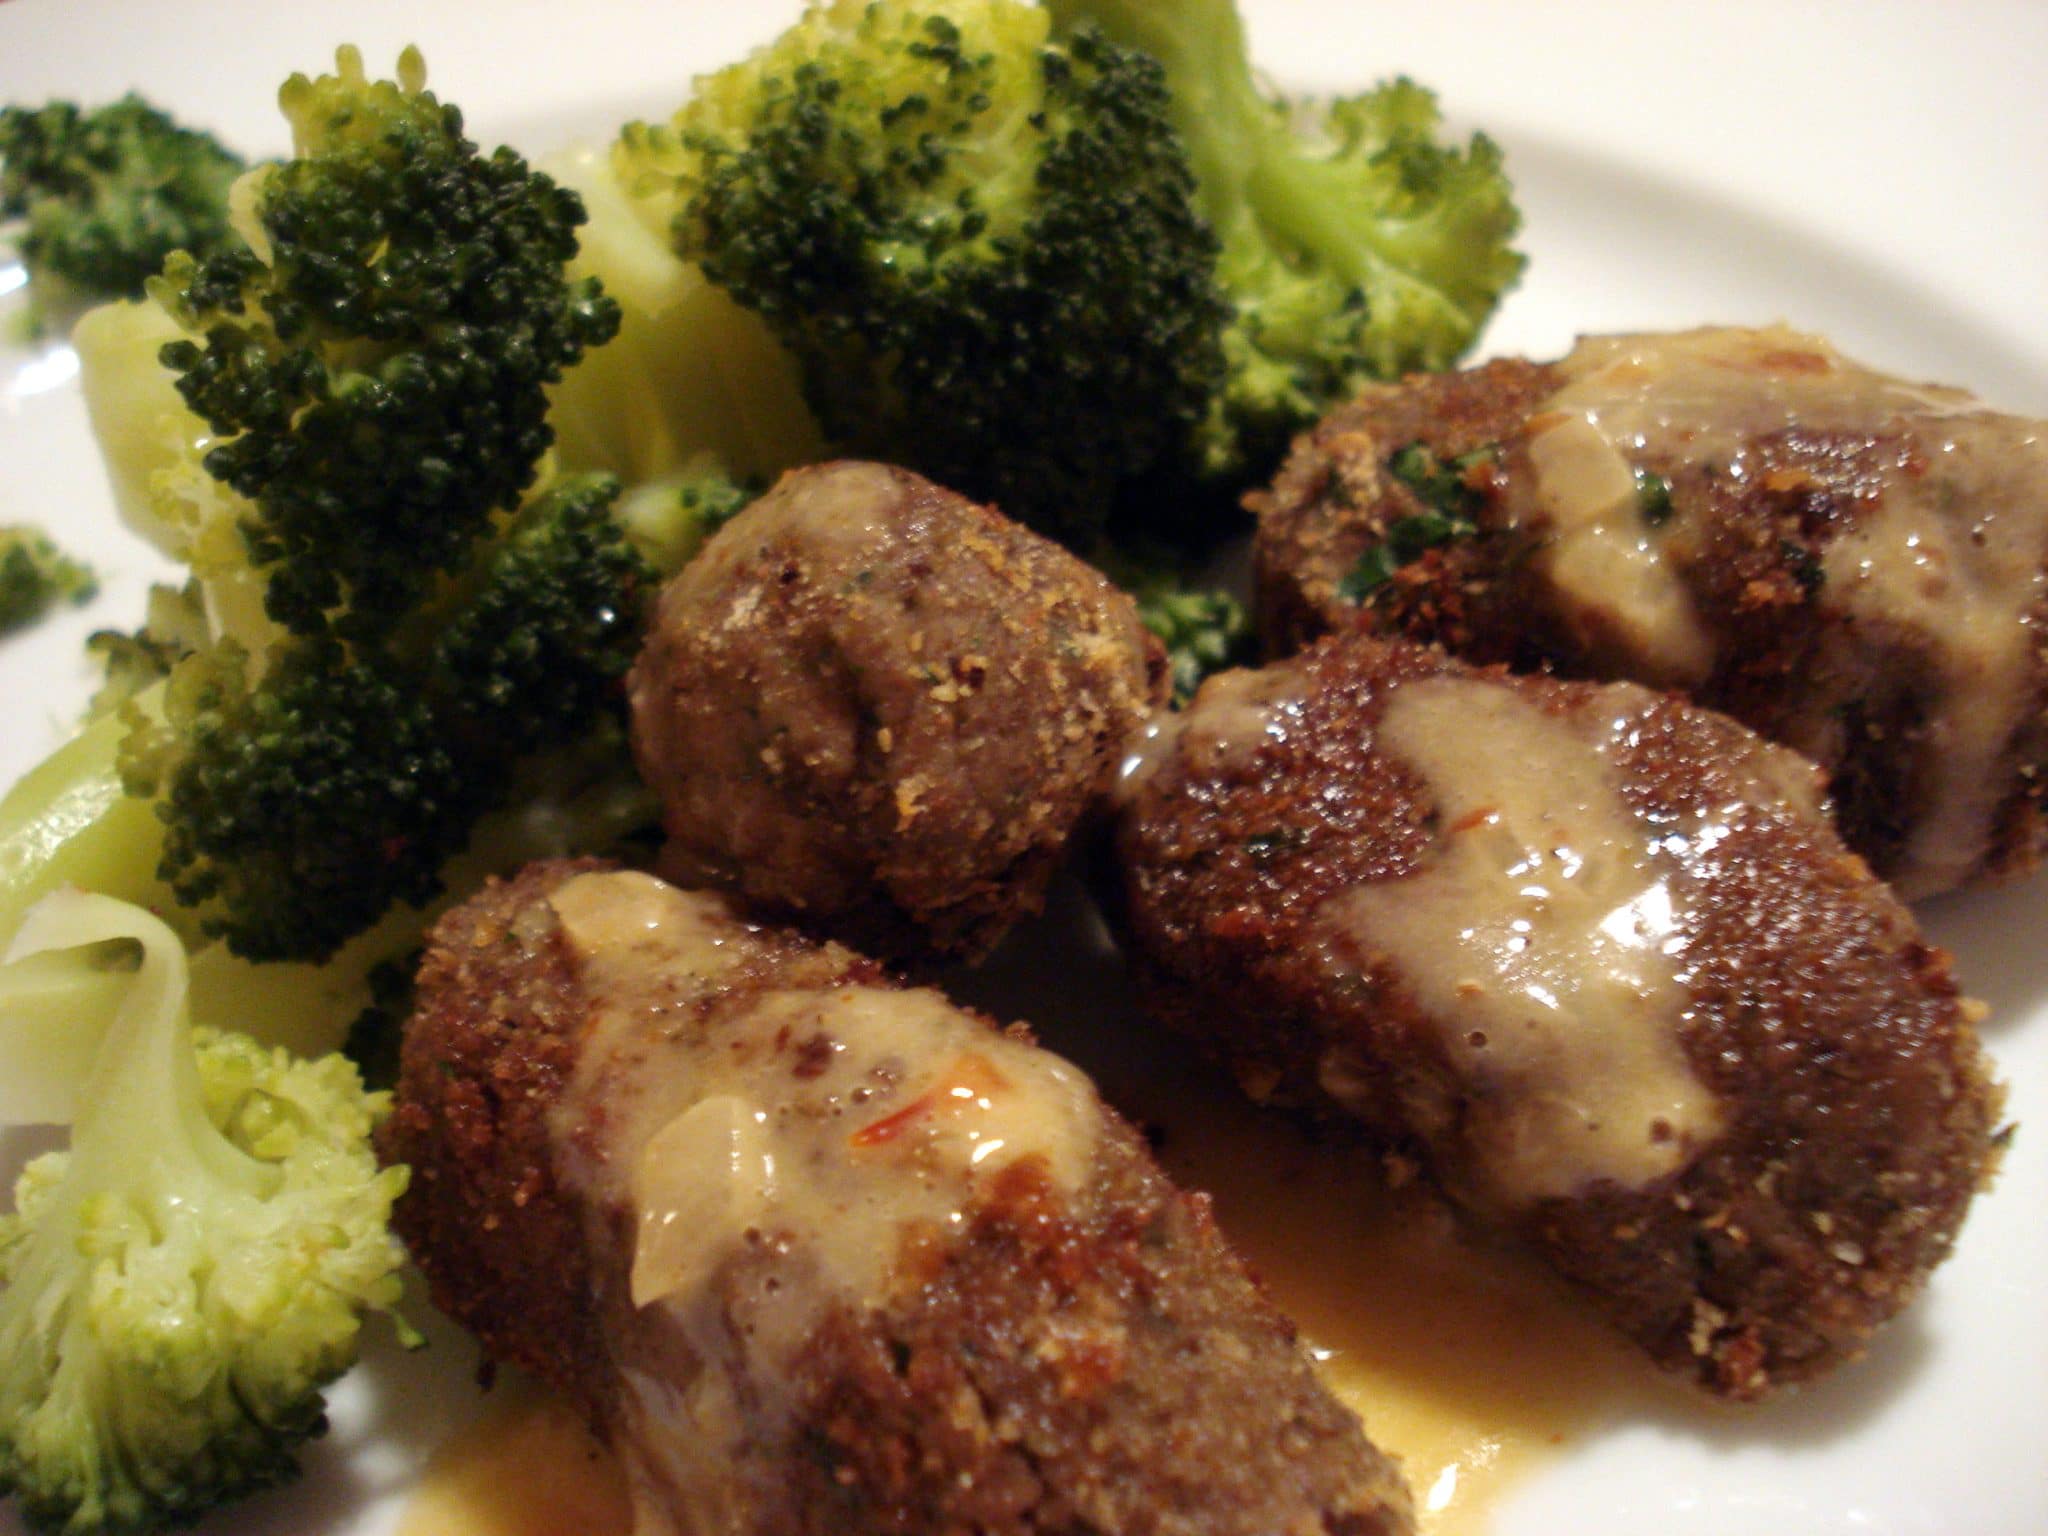 Plate of Black bean and walnut croquettes with a side of broccoli